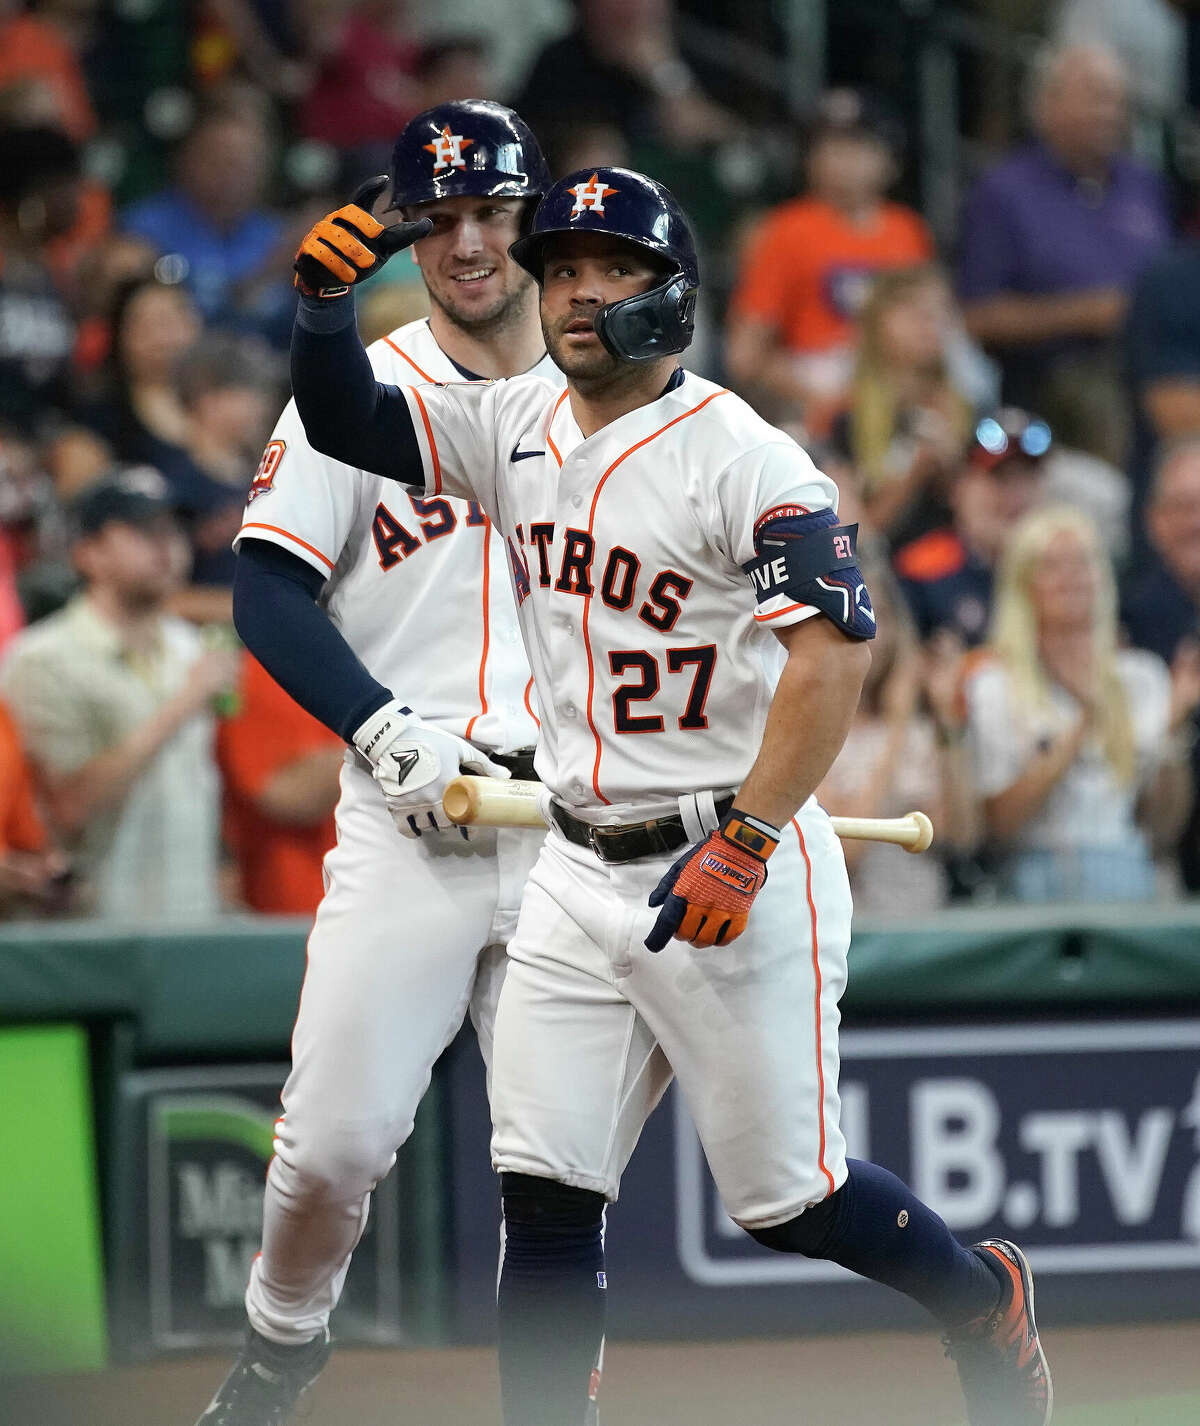 Houston Astros Jose Altuve (27) celebrates with Alex Bregman after hitting a home run against Detroit Tigers starting pitcher Eduardo Rodriguez during the third inning of an MLB baseball game at Minute Maid Park on Saturday, May 7, 2022 in Houston.